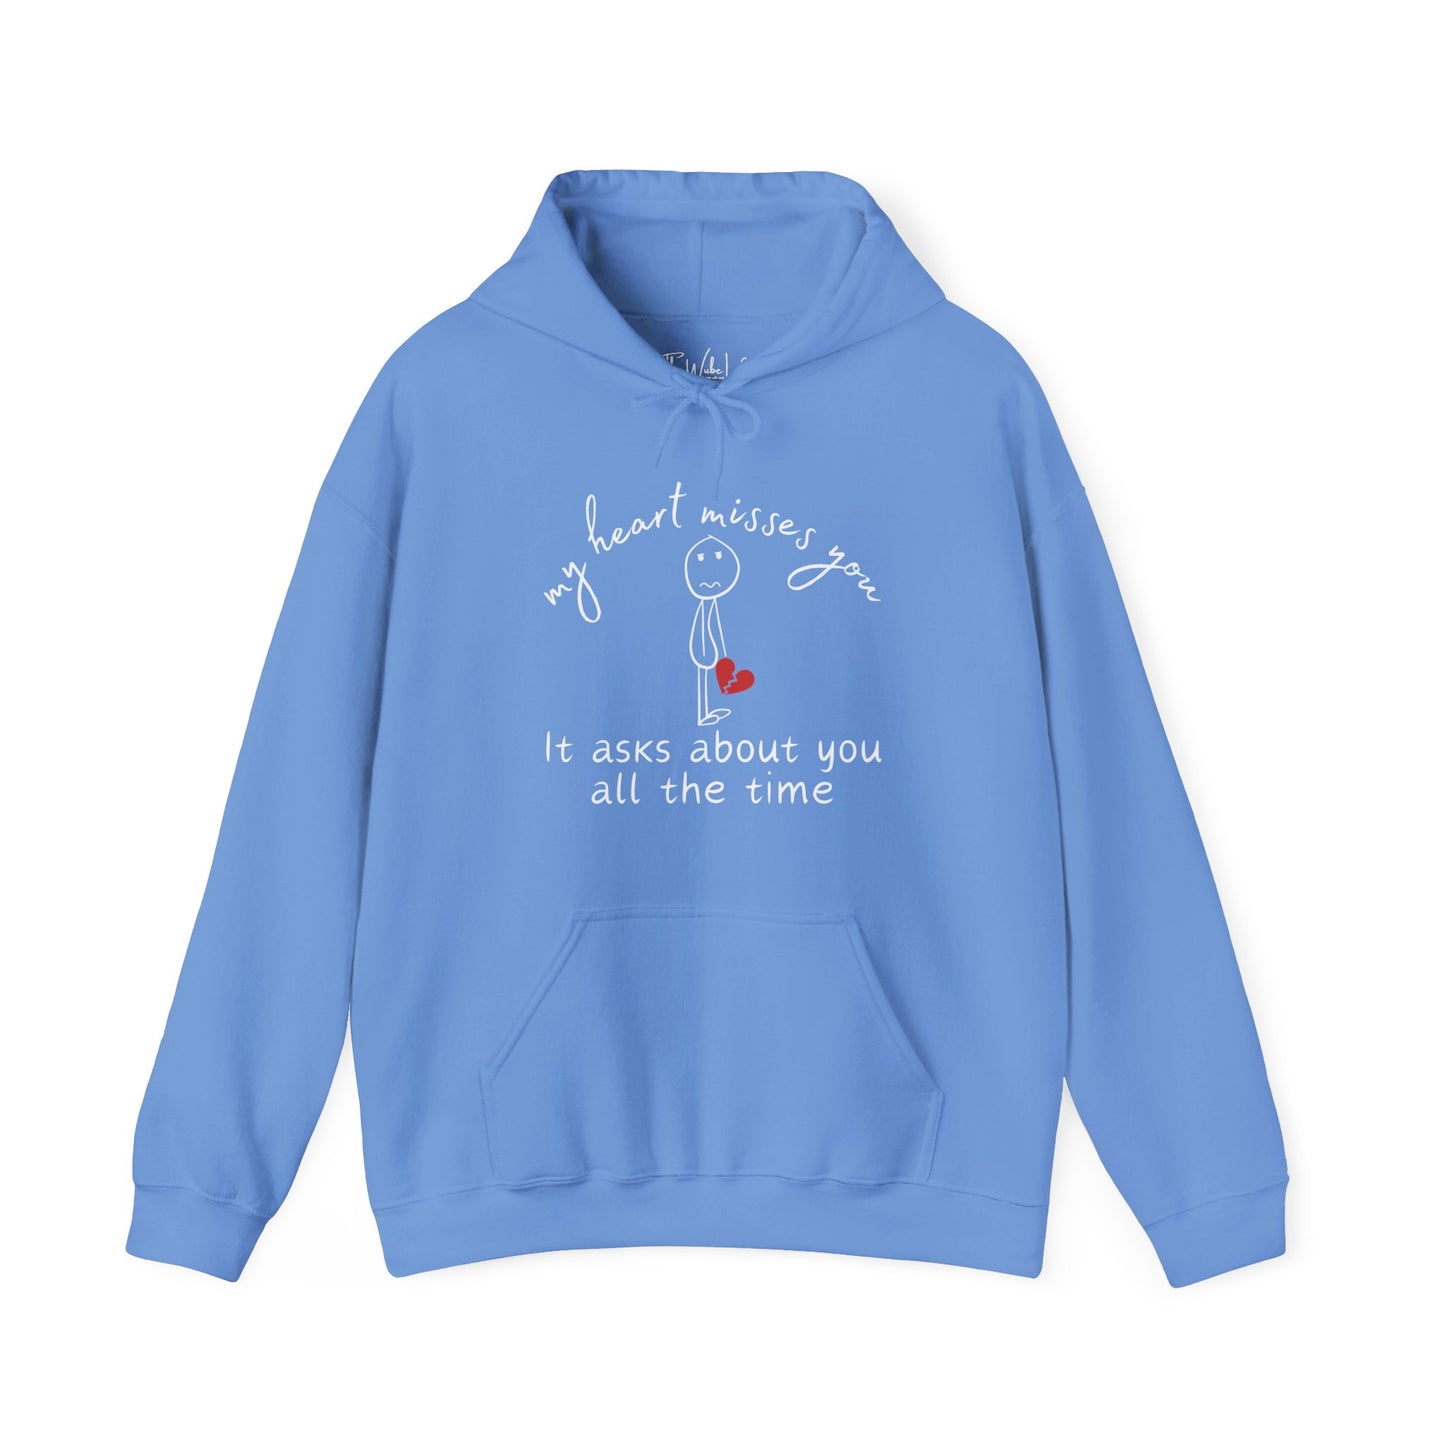 Gildan 18500 Hooded Sweatshirt, color: Carolina Blue - hoodie featuring a sad stick figure and a message that speaks to the soul for grieving person.